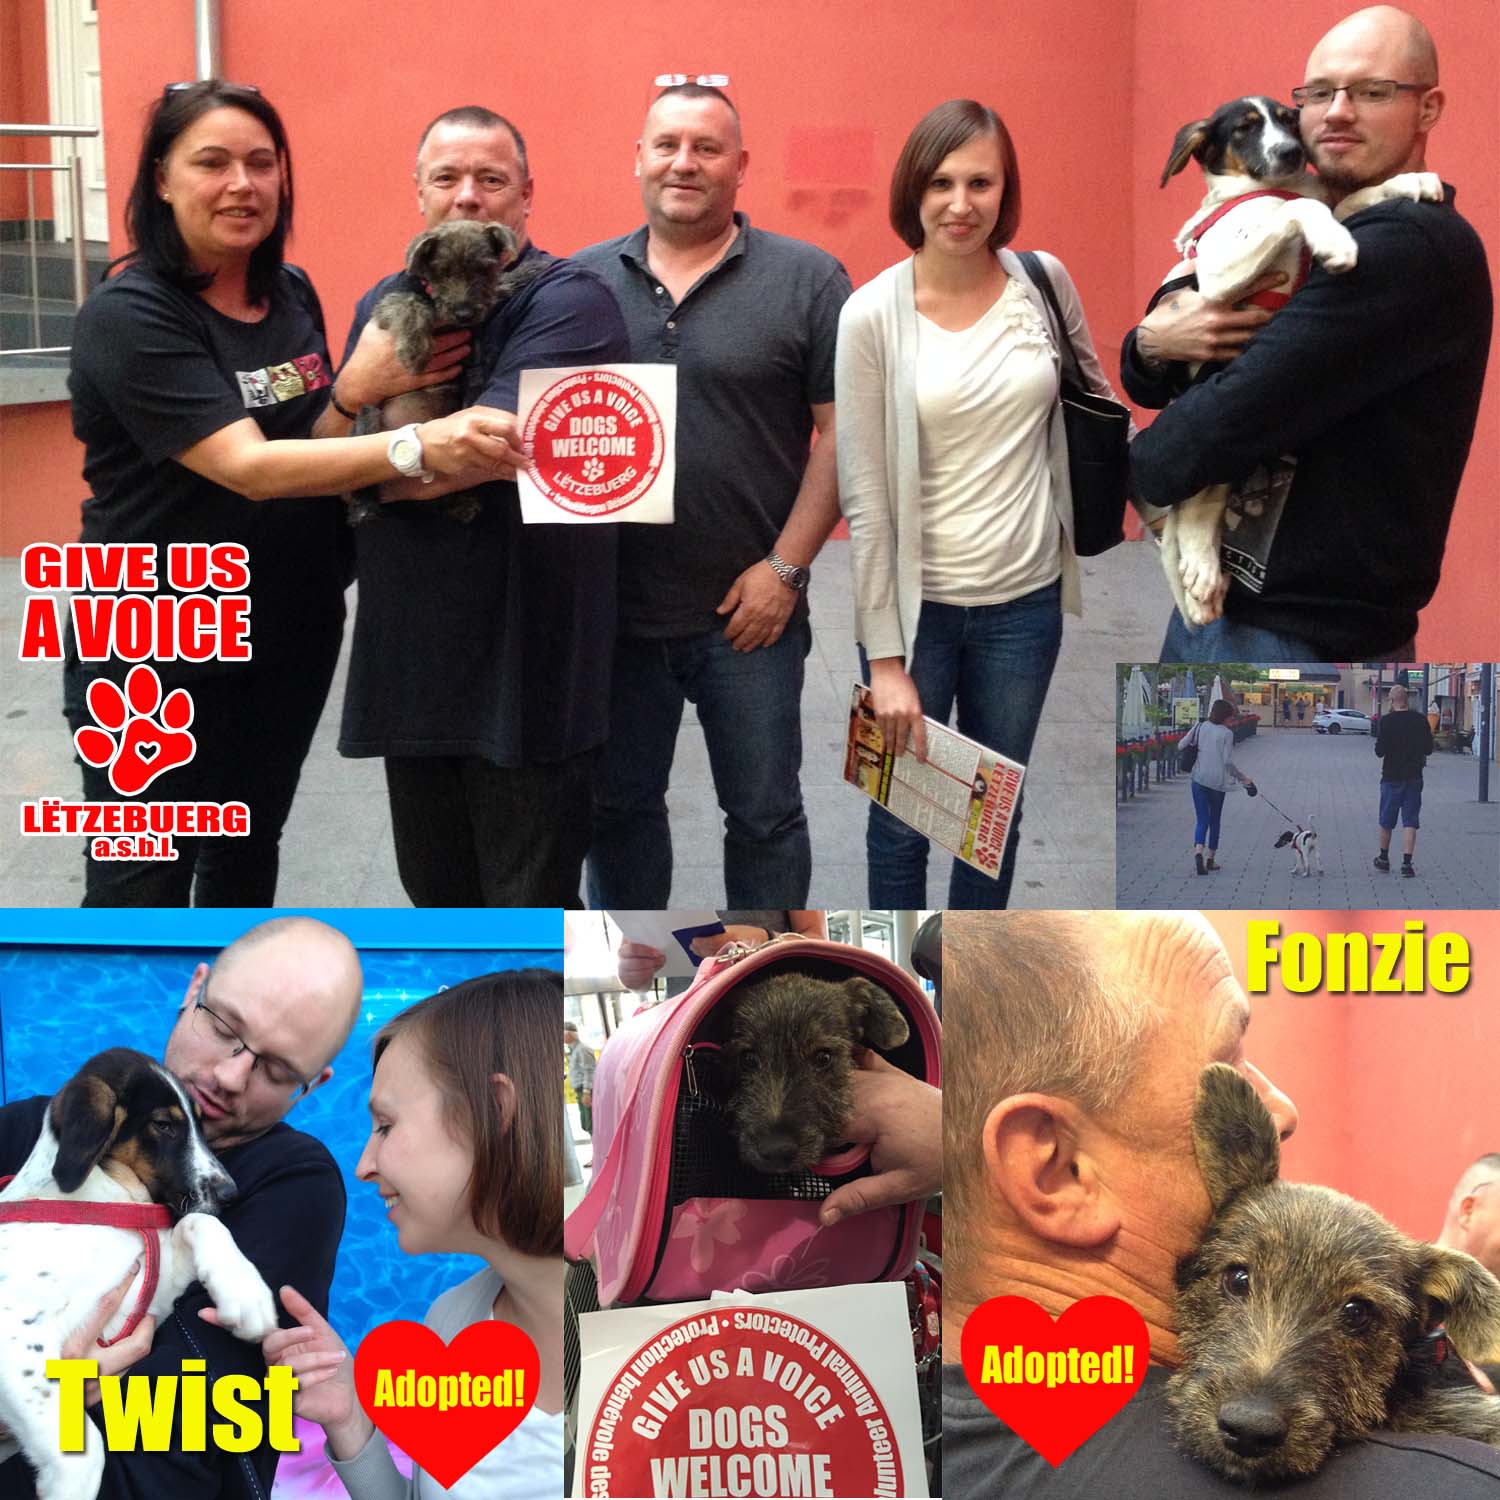 Fonsi and Twist Adopted! copy